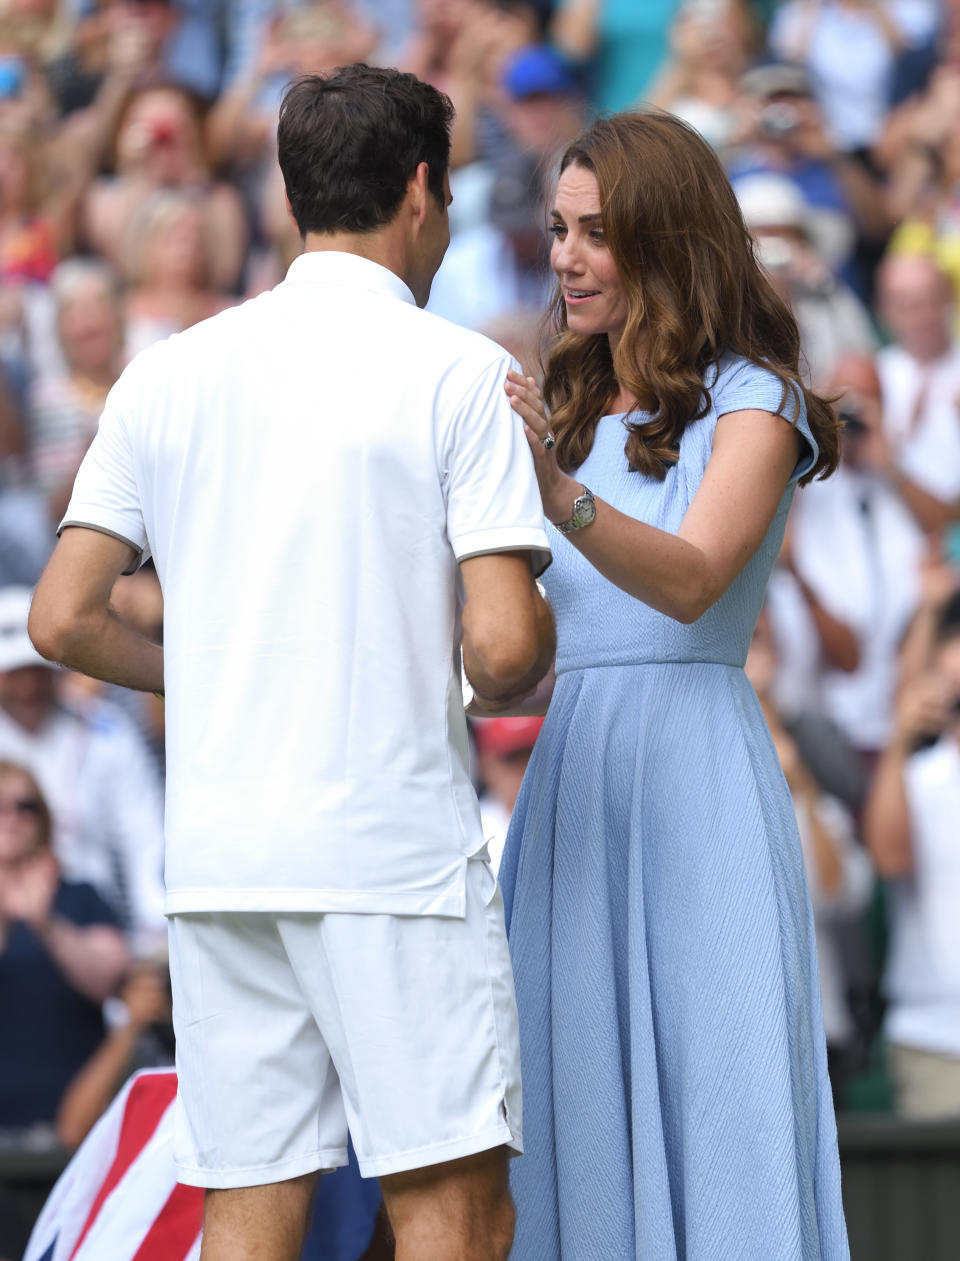 LONDON, ENGLAND - JULY 14: Roger Federer of Switzerland is presented with the runners-up trophy by Catherine, Duchess of Cambridge after his Men's Singles final against Novak Djokovic of Serbia during Day thirteen of the Wimbledon Tennis Championships at All England Lawn Tennis and Croquet Club on July 14, 2019 in London, England. (Photo by Karwai Tang/Getty Images)